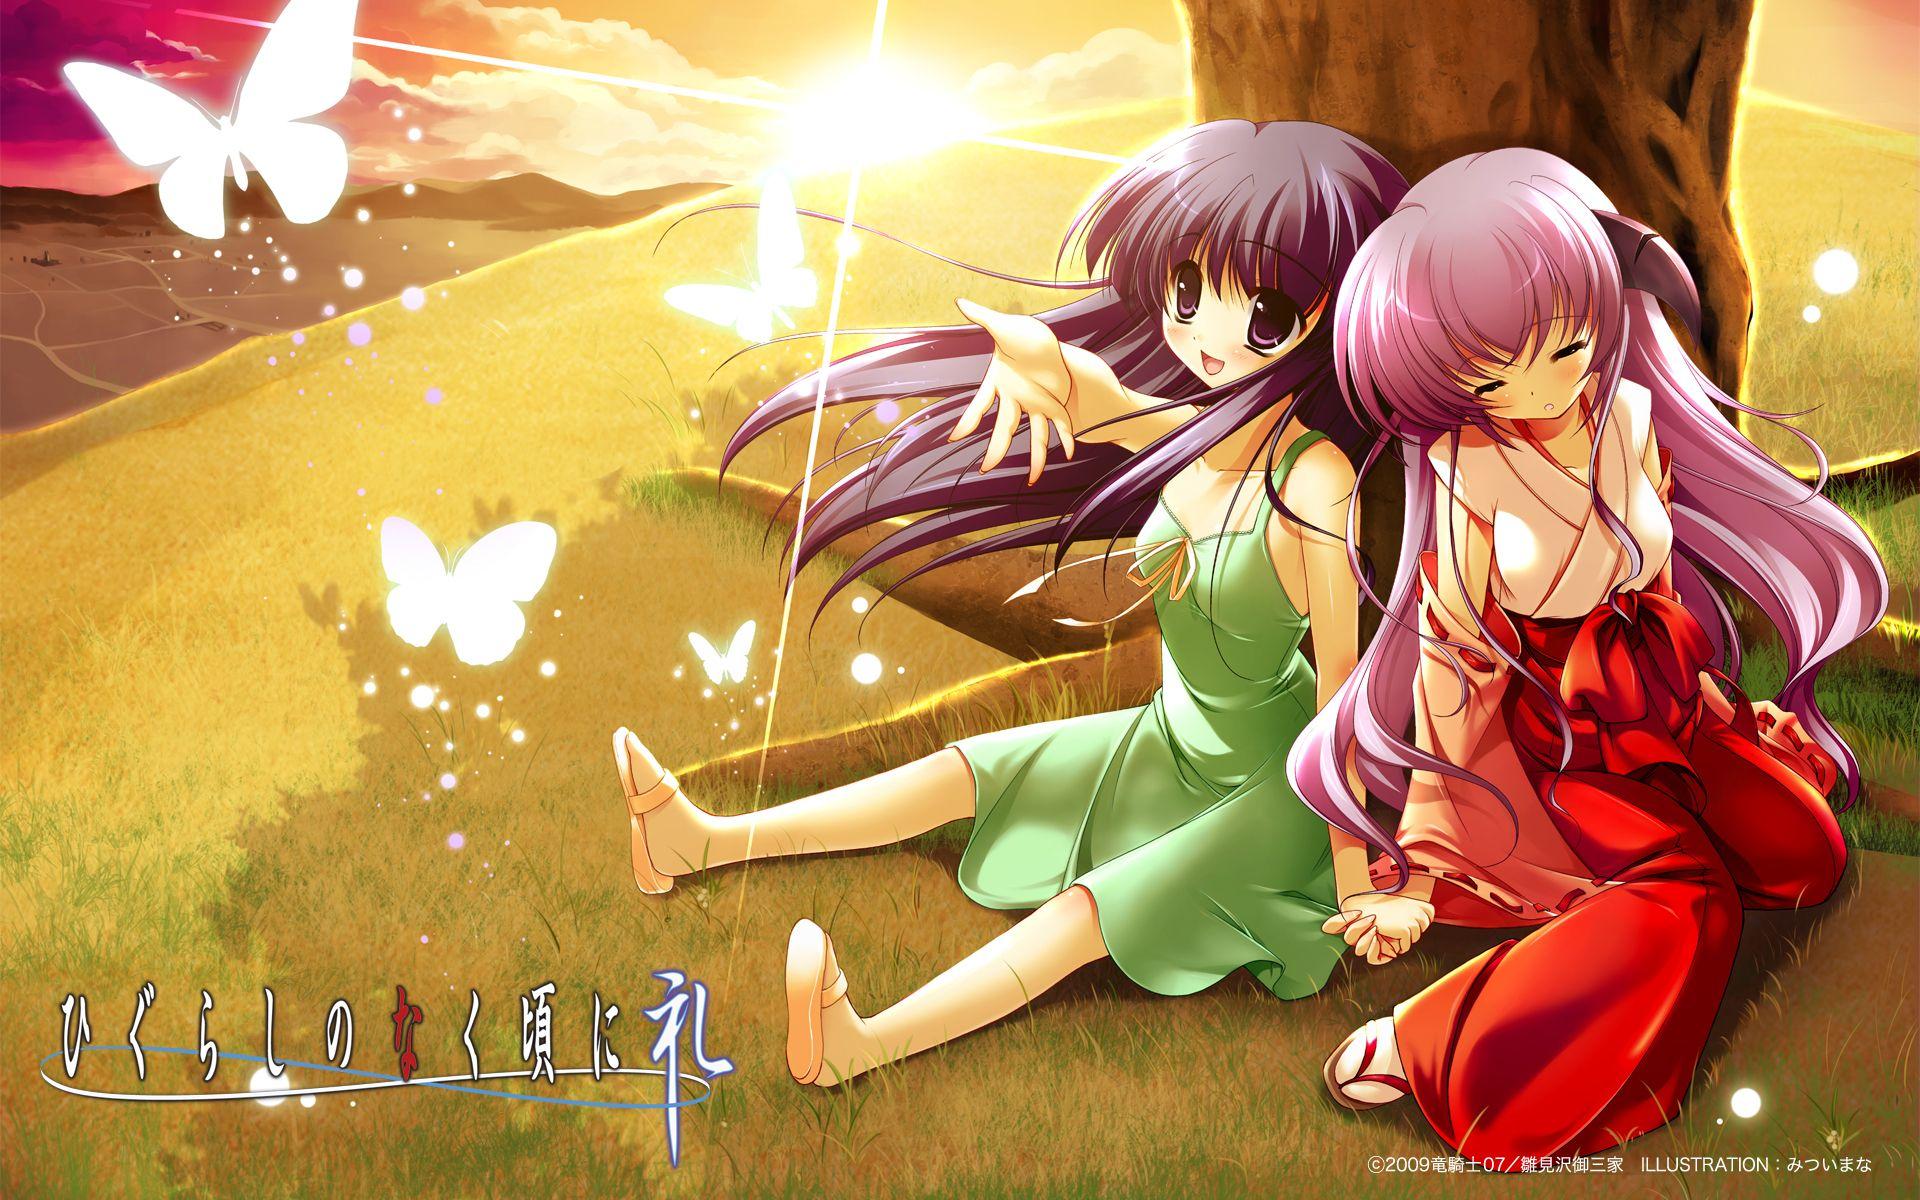 Higurashi When They Cry wallpaper. Anime+. Crying